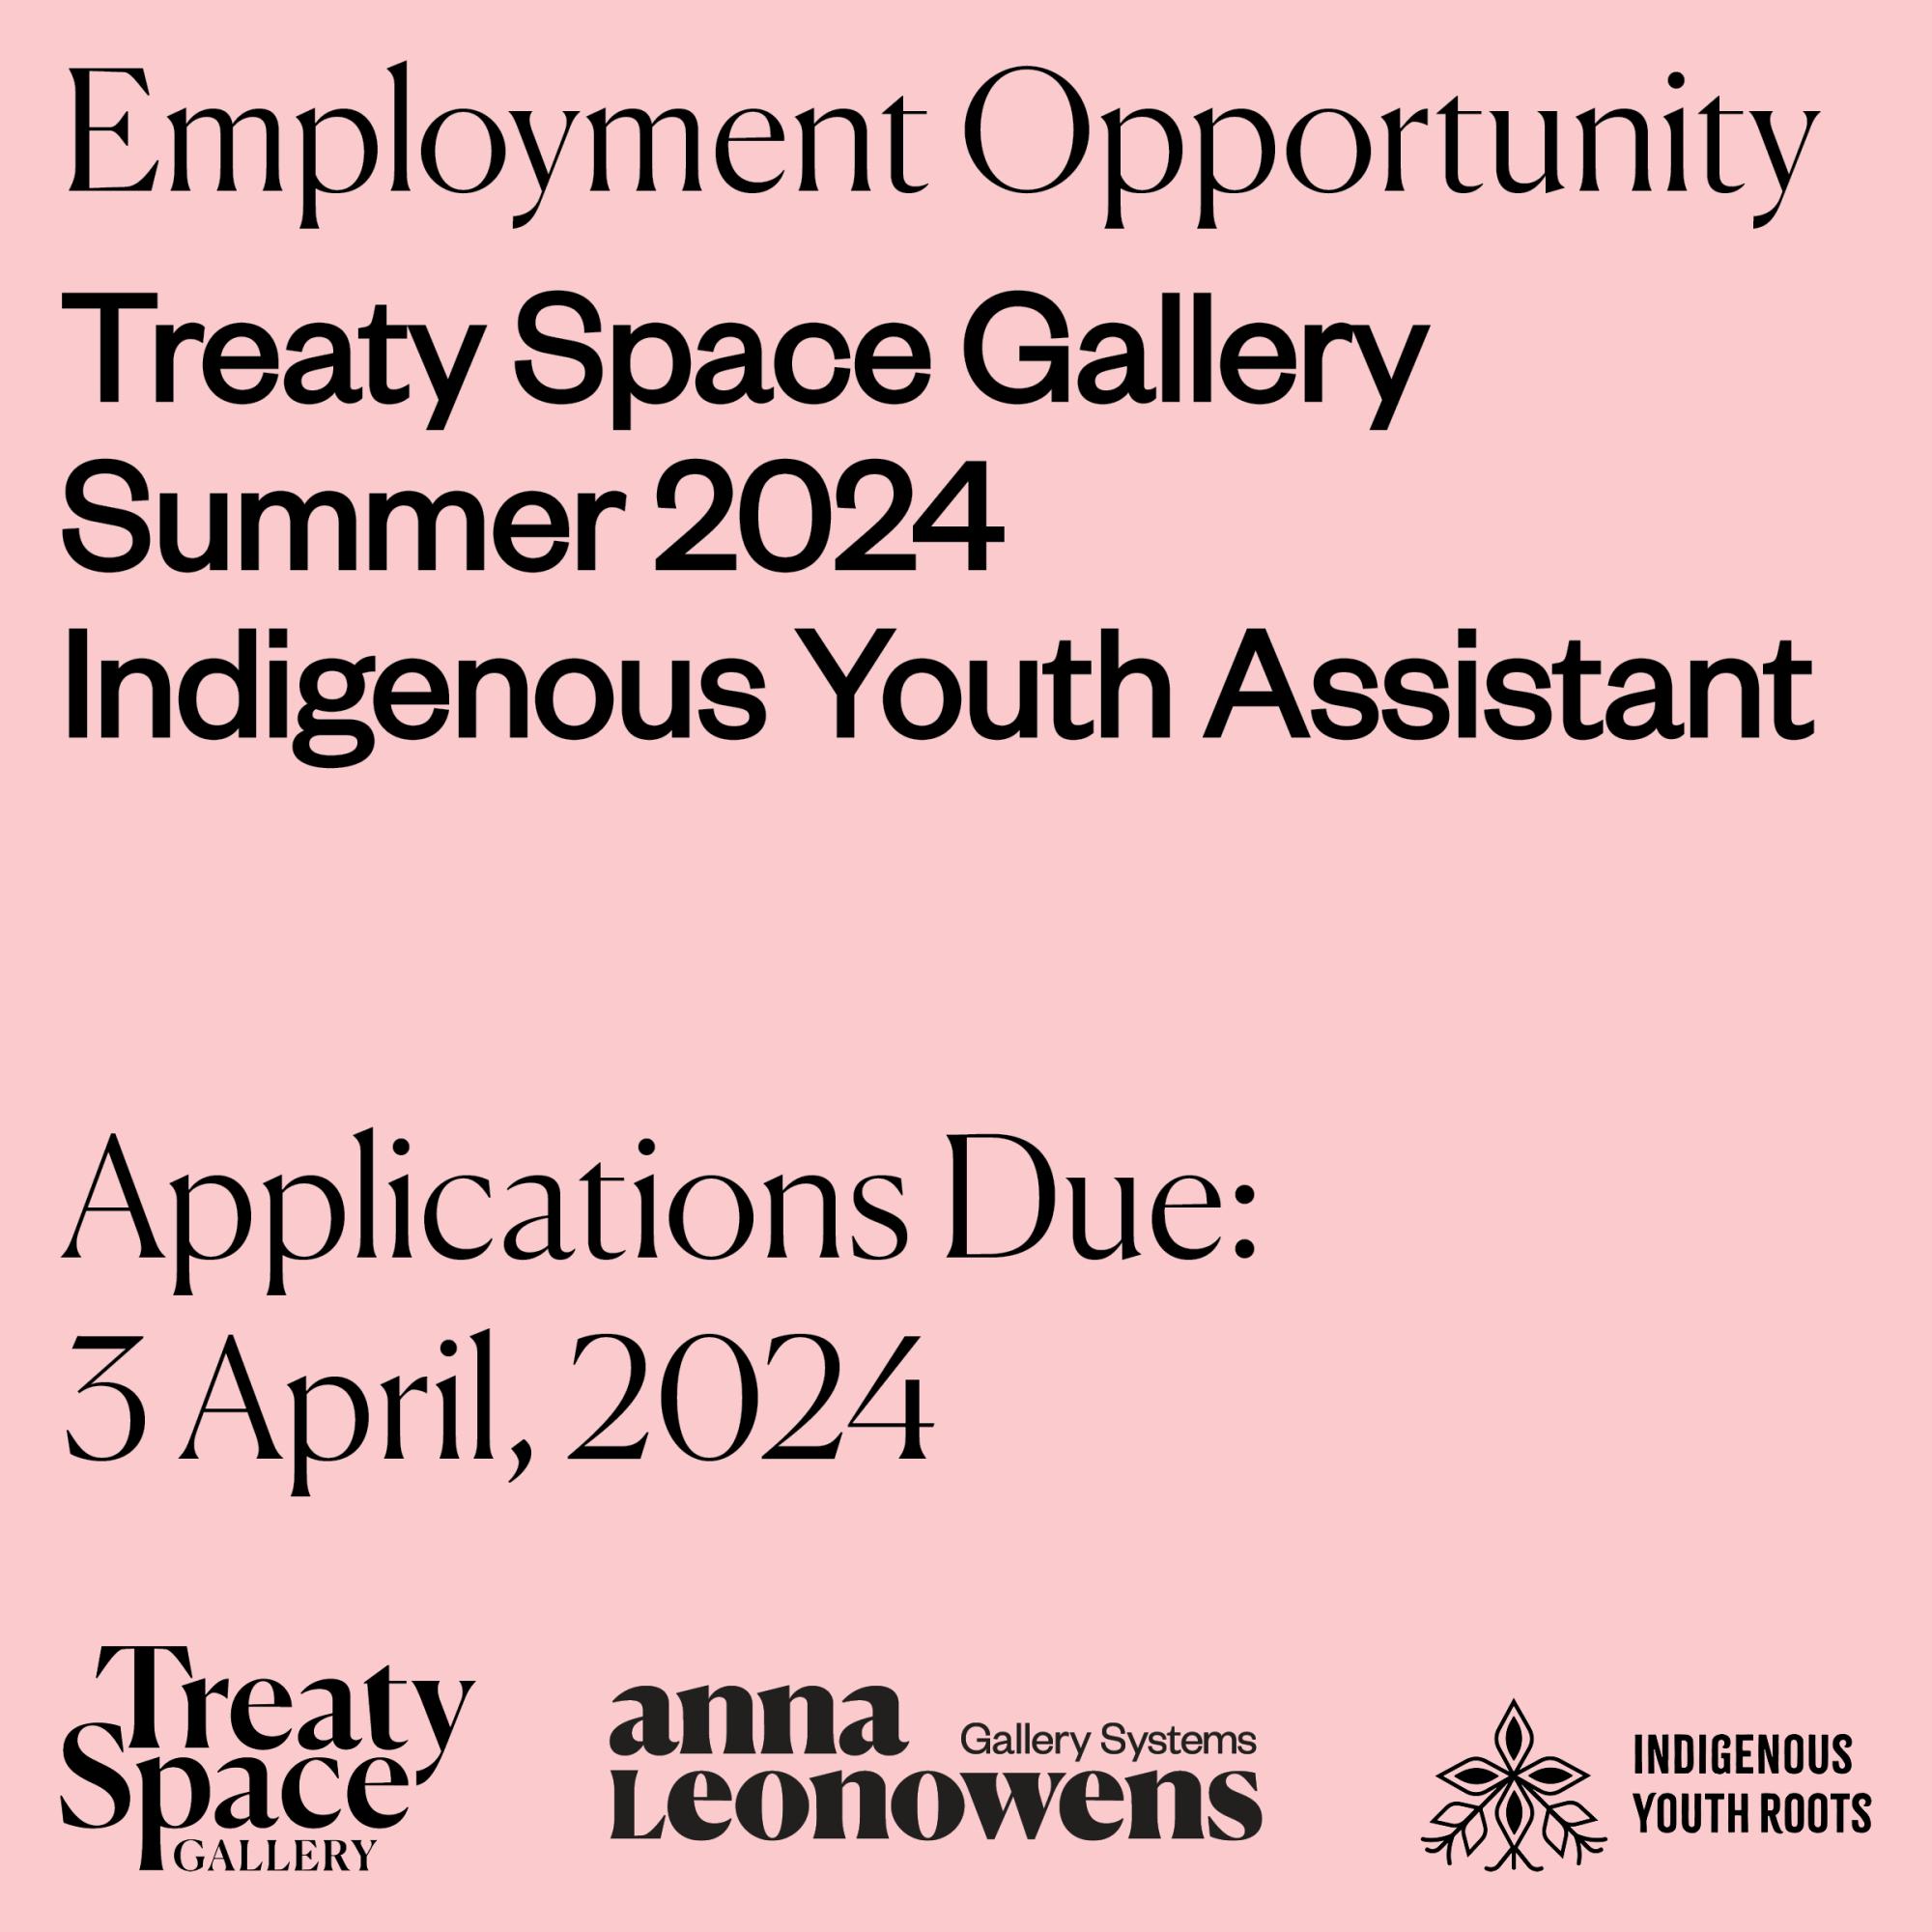 [ID: "Light pink background with black text overlayed that reads 'Employment Opportunity, Treaty Space Gallery, Summer 2024, Indigenous Youth Assistant, Applications Due: 3 April, 2024.' Underneath are the logos for Treaty Space Gallery, Anna Leonowens Gallery, and Indigenous Youth Roots in Black."]